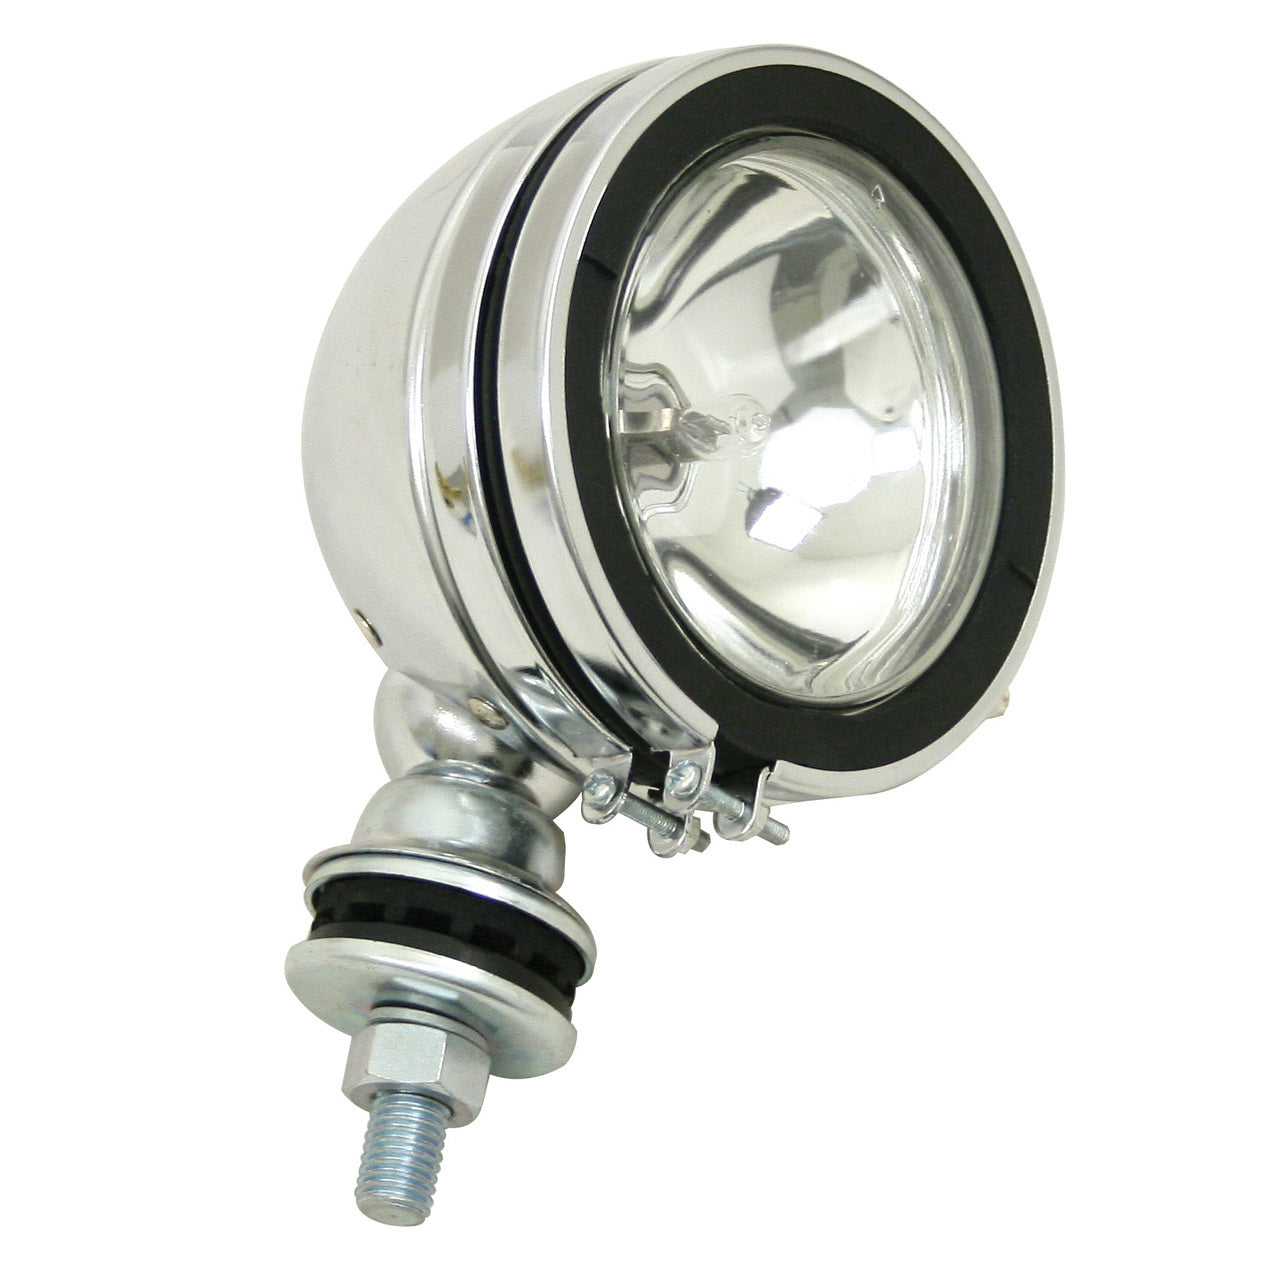 CHROME 6" ROUND OFF-ROAD LIGHT WITH MOUNTING POST - H3 100W